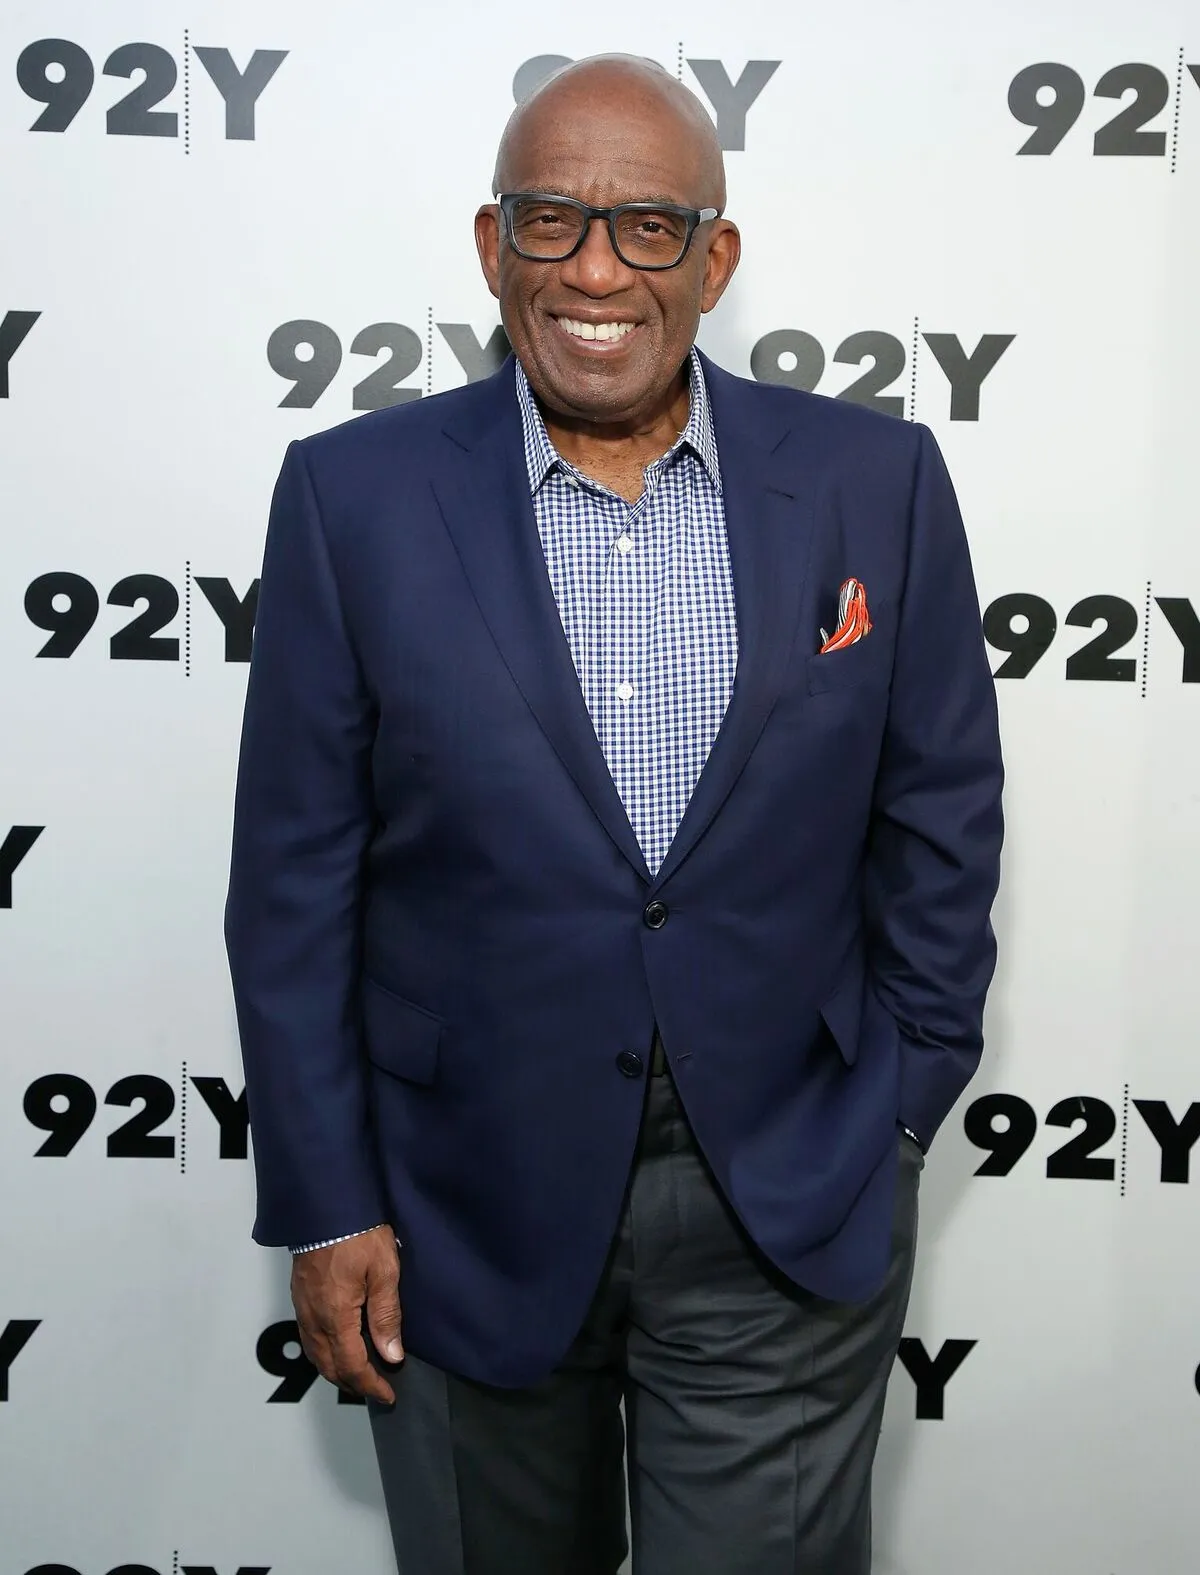 Al Roker during an event which featured his conversation with Natalie Morales at 92nd Street Y on April 16, 2018. | Photo: Getty Images